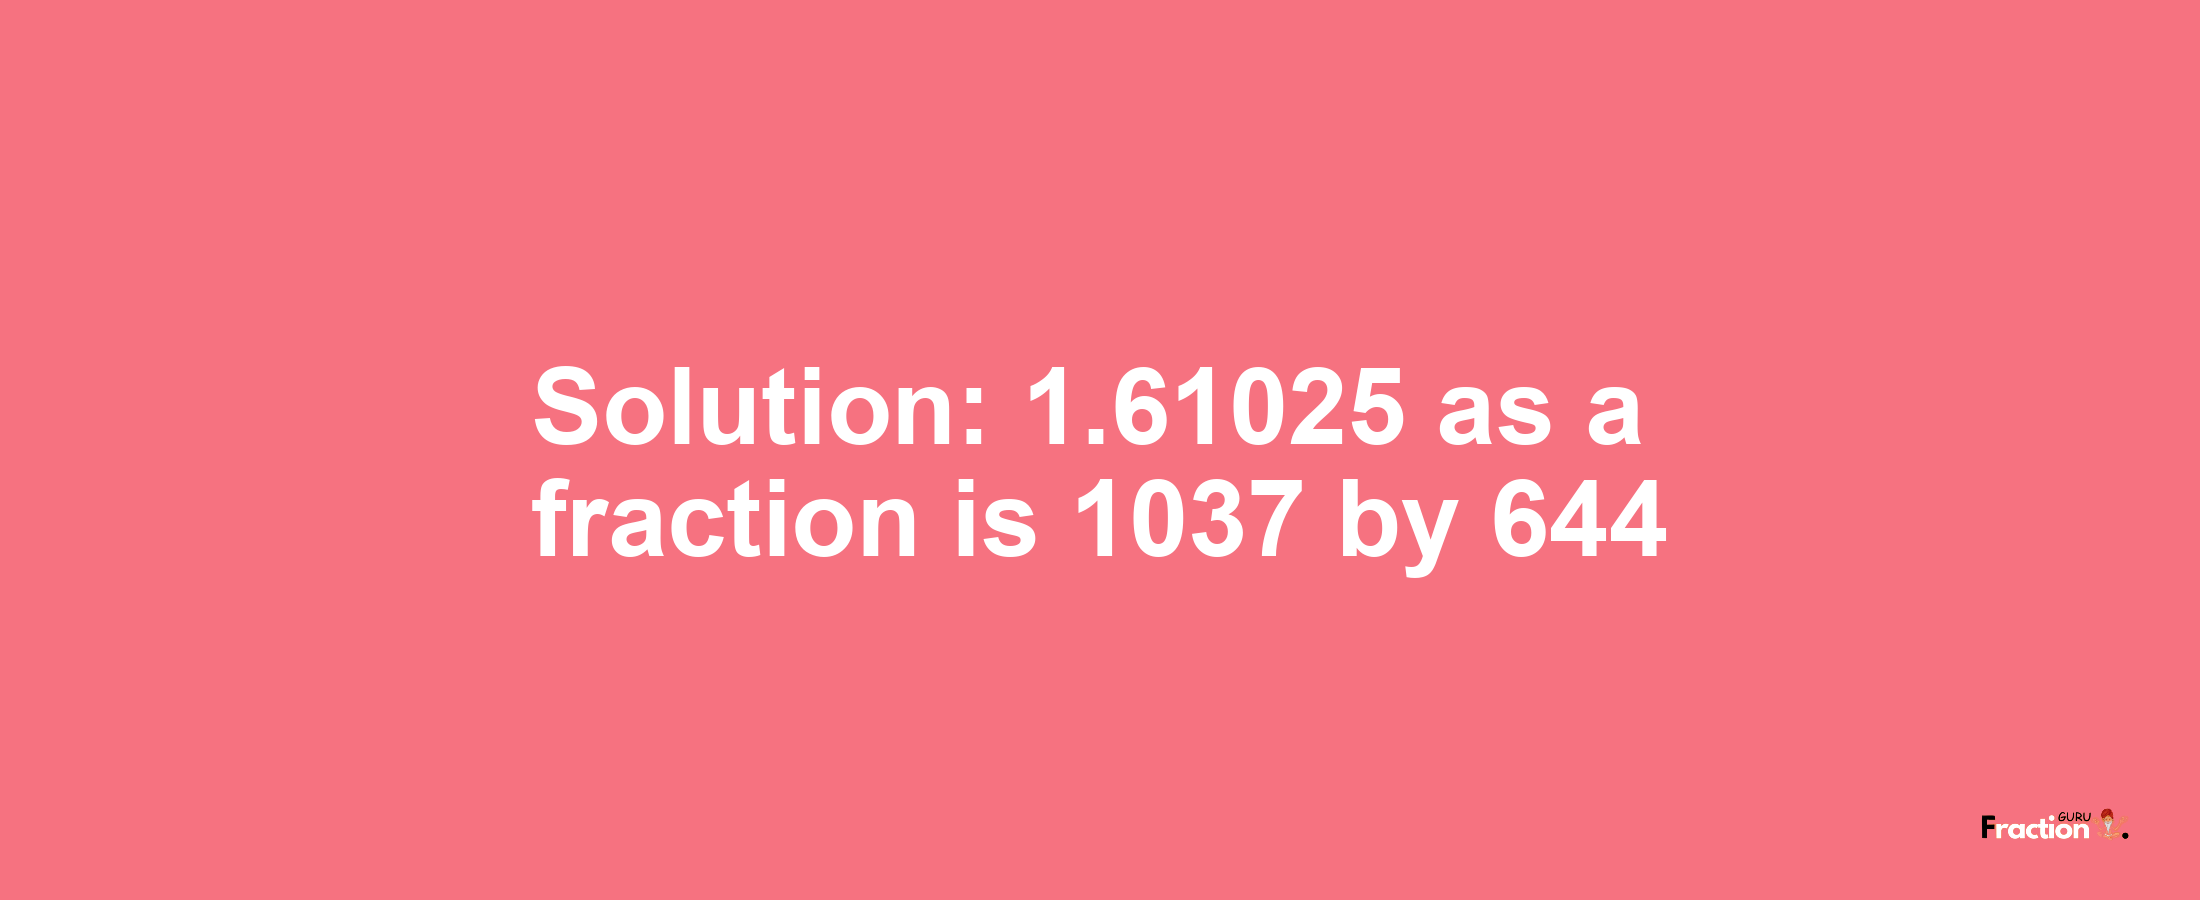 Solution:1.61025 as a fraction is 1037/644